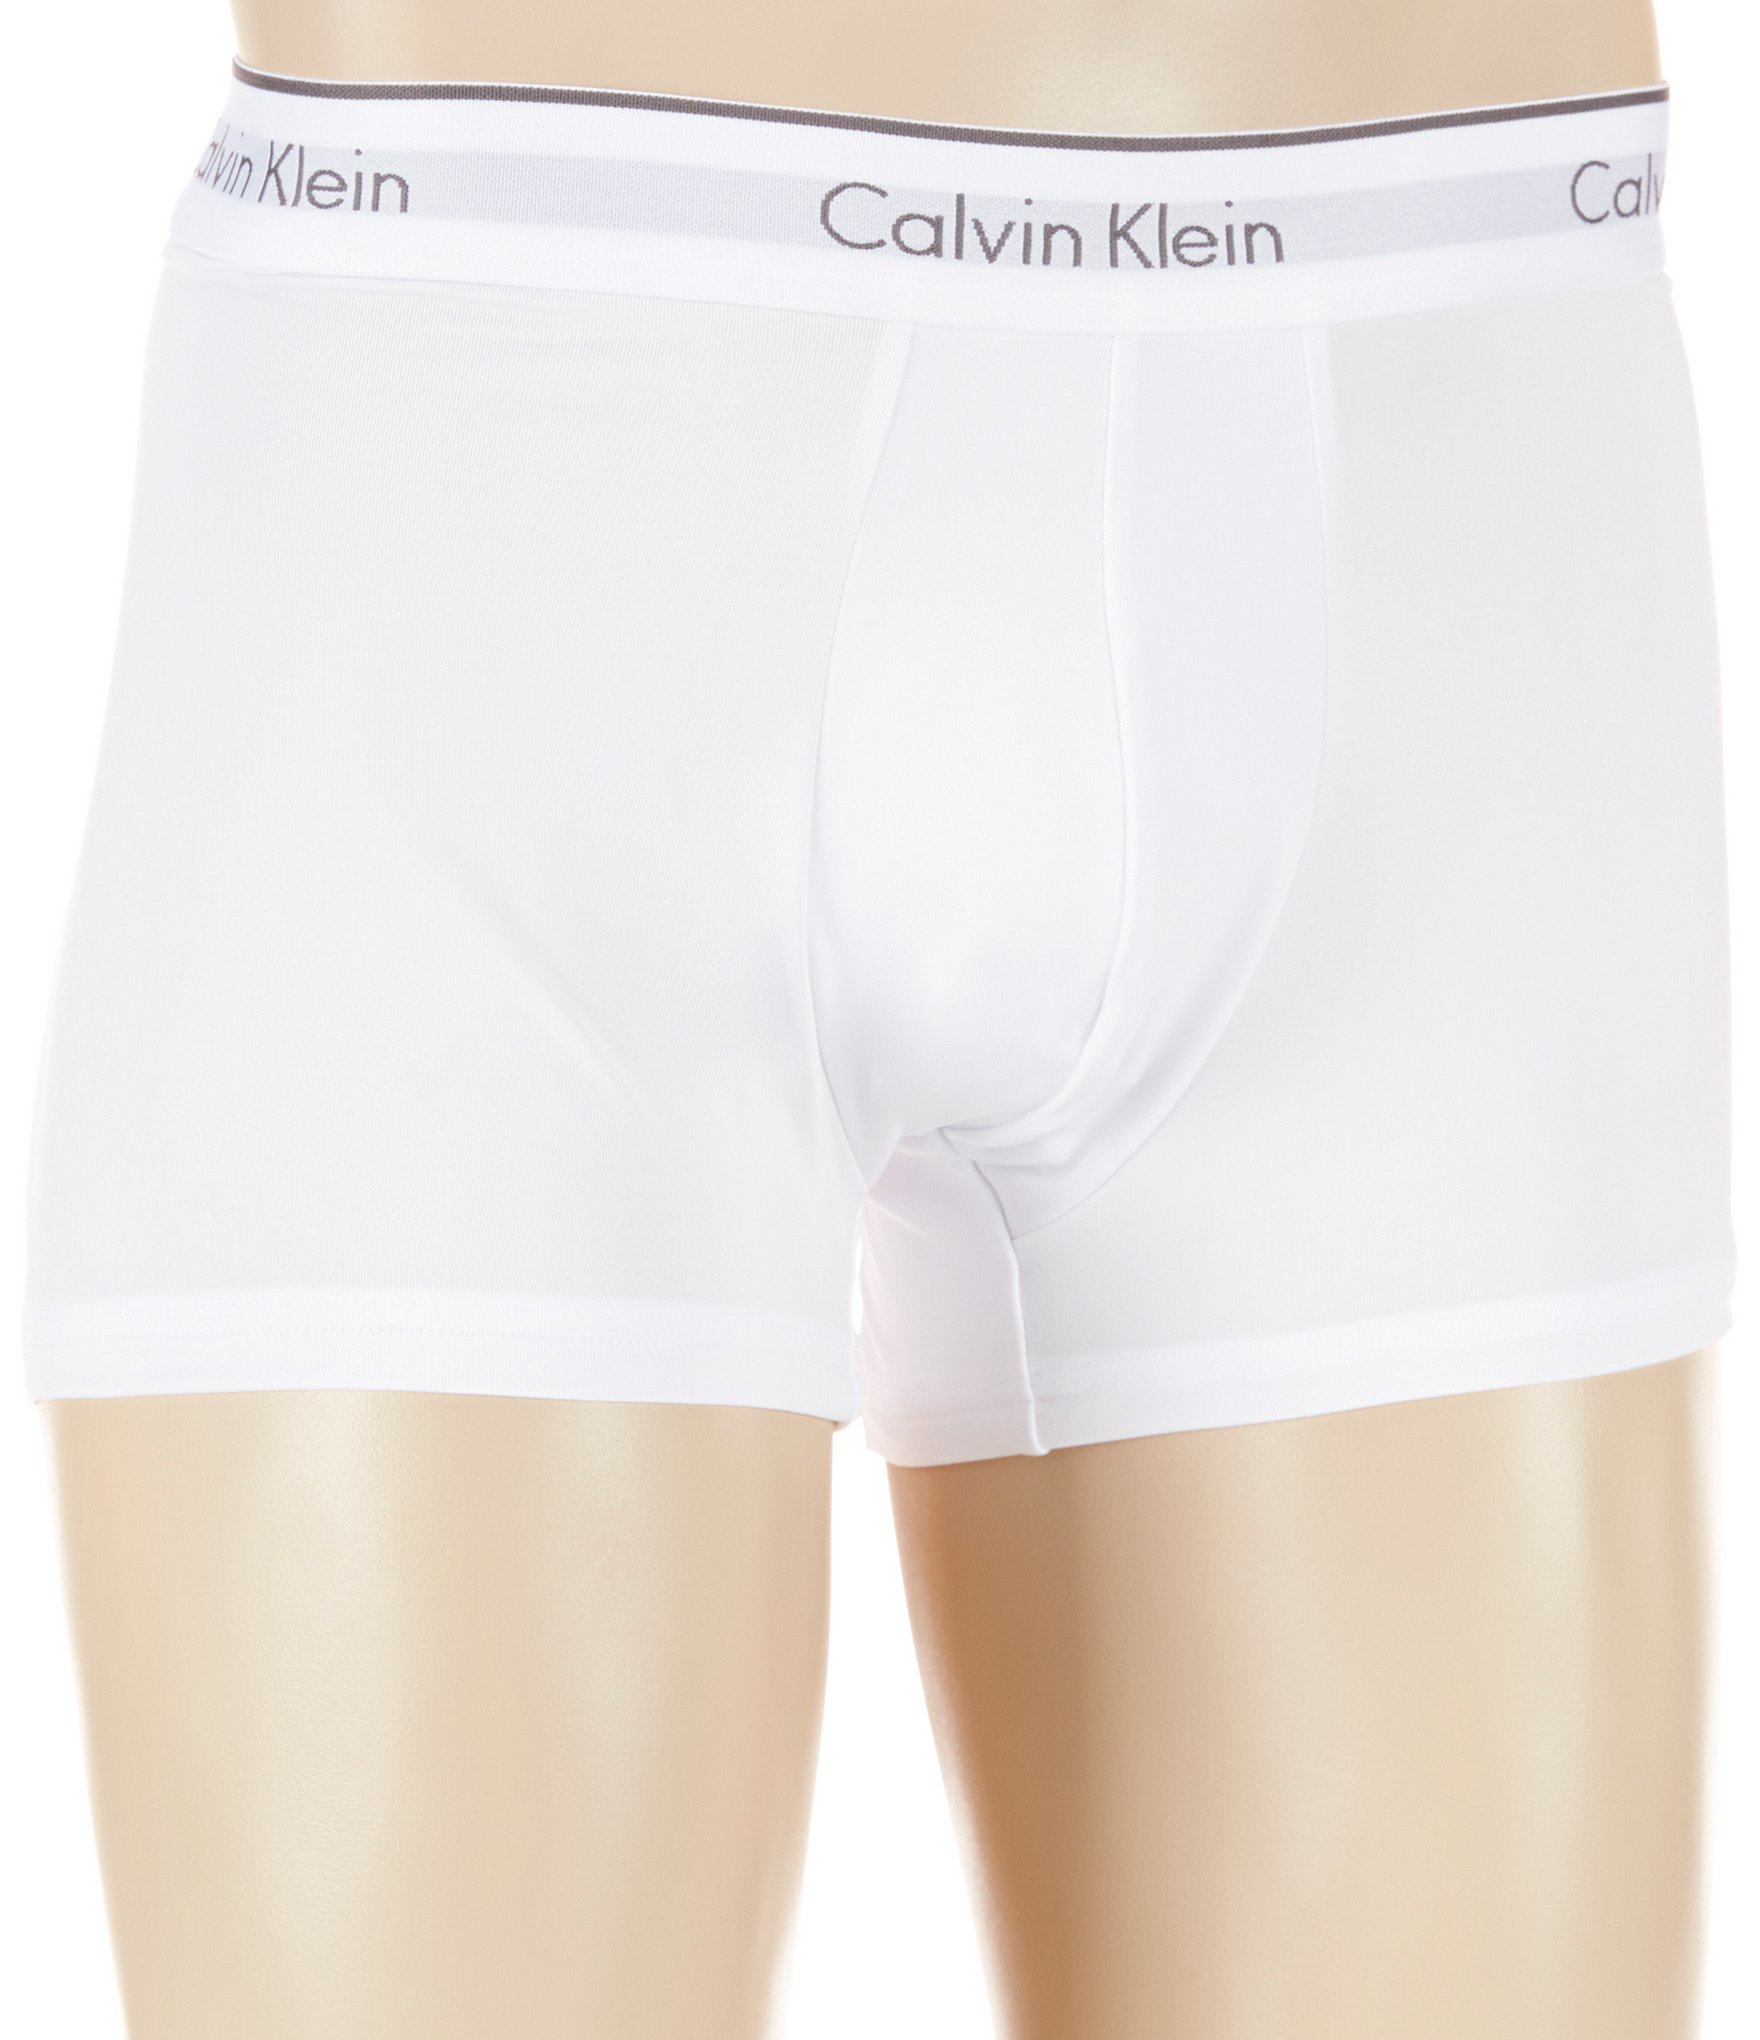 Calvin klein Micro Low Rise Trunks Multi 3-pack in White for Men - Save ...